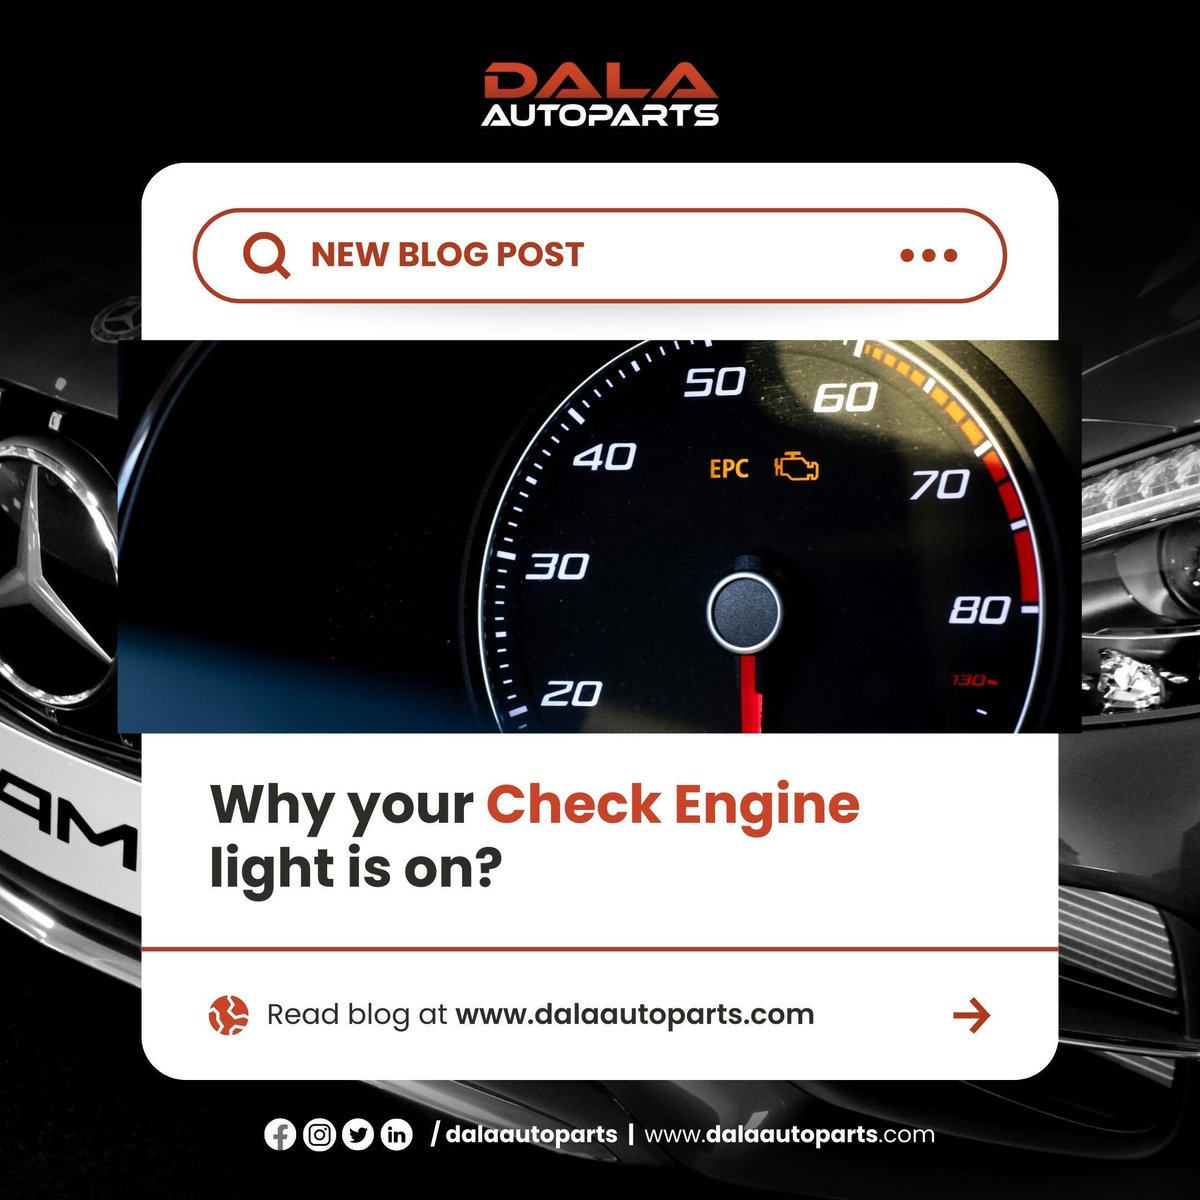 Why your check engine light is on?  

Trust us to help! dalaautoparts.com 

#DalaAutoParts #CheckEngineLight #CarTroubleshooting #EngineProblems #CarMaintenance #AutoRepair #MechanicTips #AutoTroubleshooting #EngineWarning #CarCare #Niger #ElonMusk #Titanic #TheEqualizer3